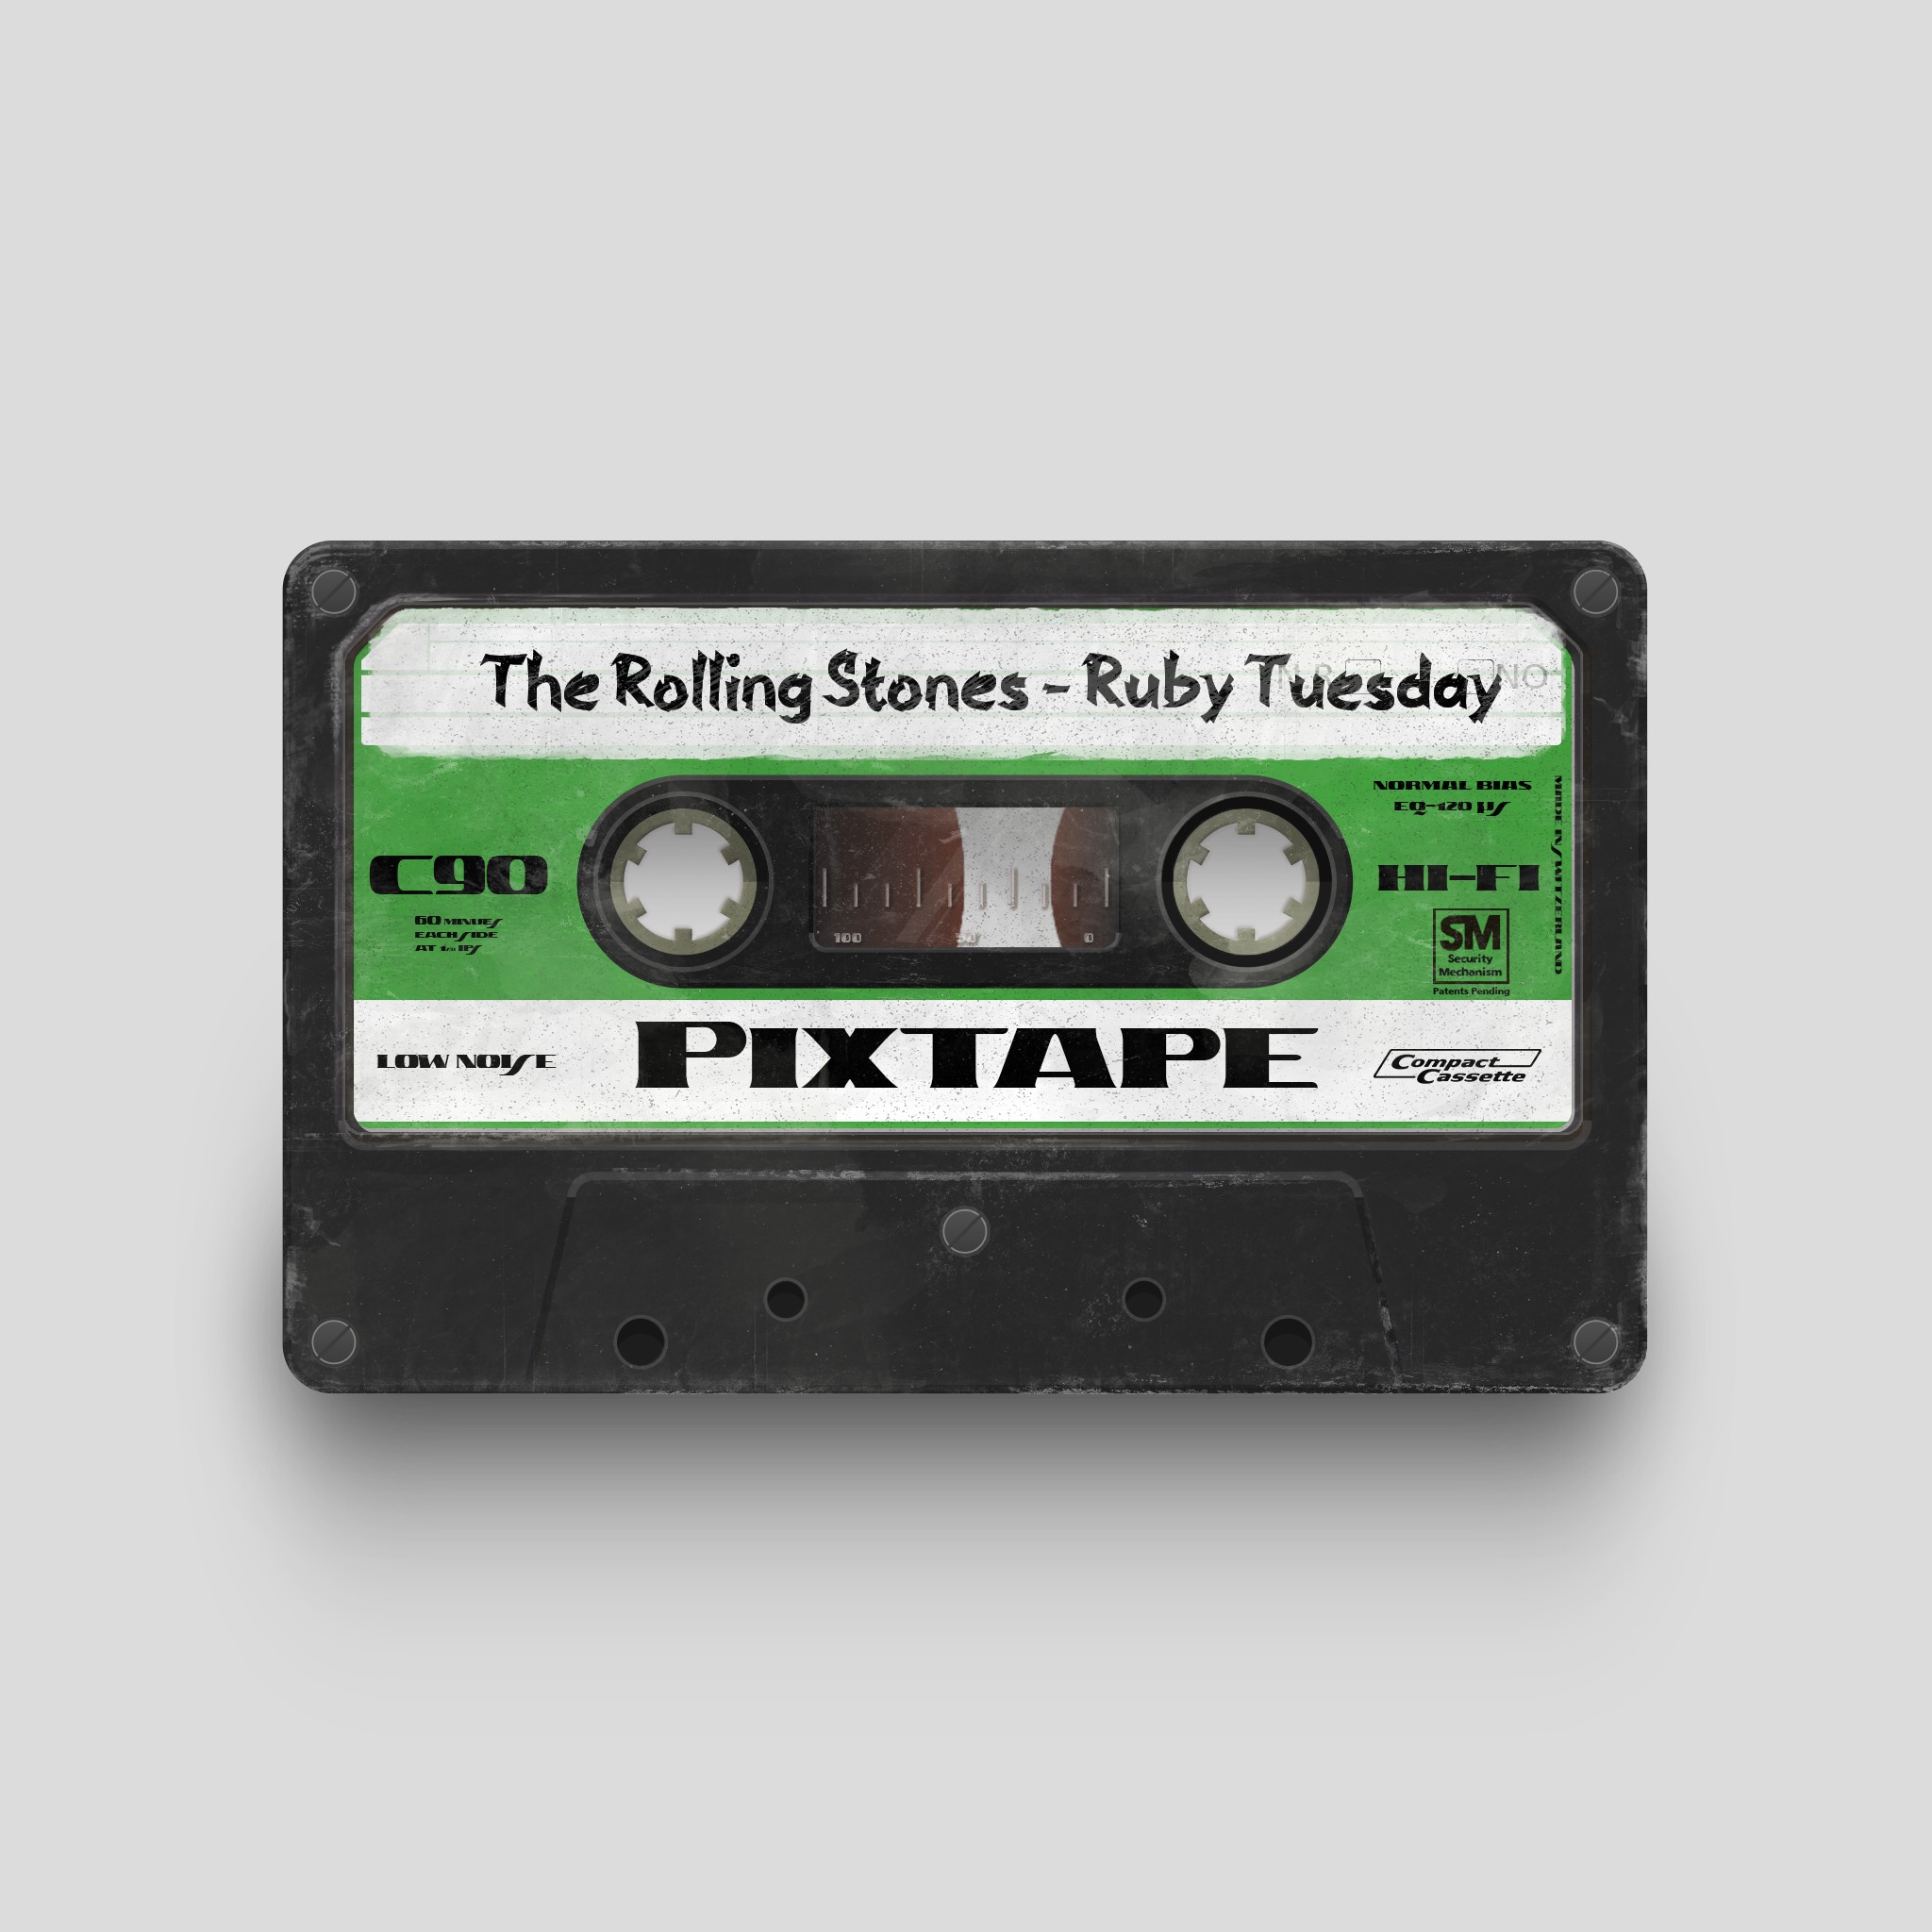 PixTape #2962 | The Rolling Stones - Ruby Tuesday